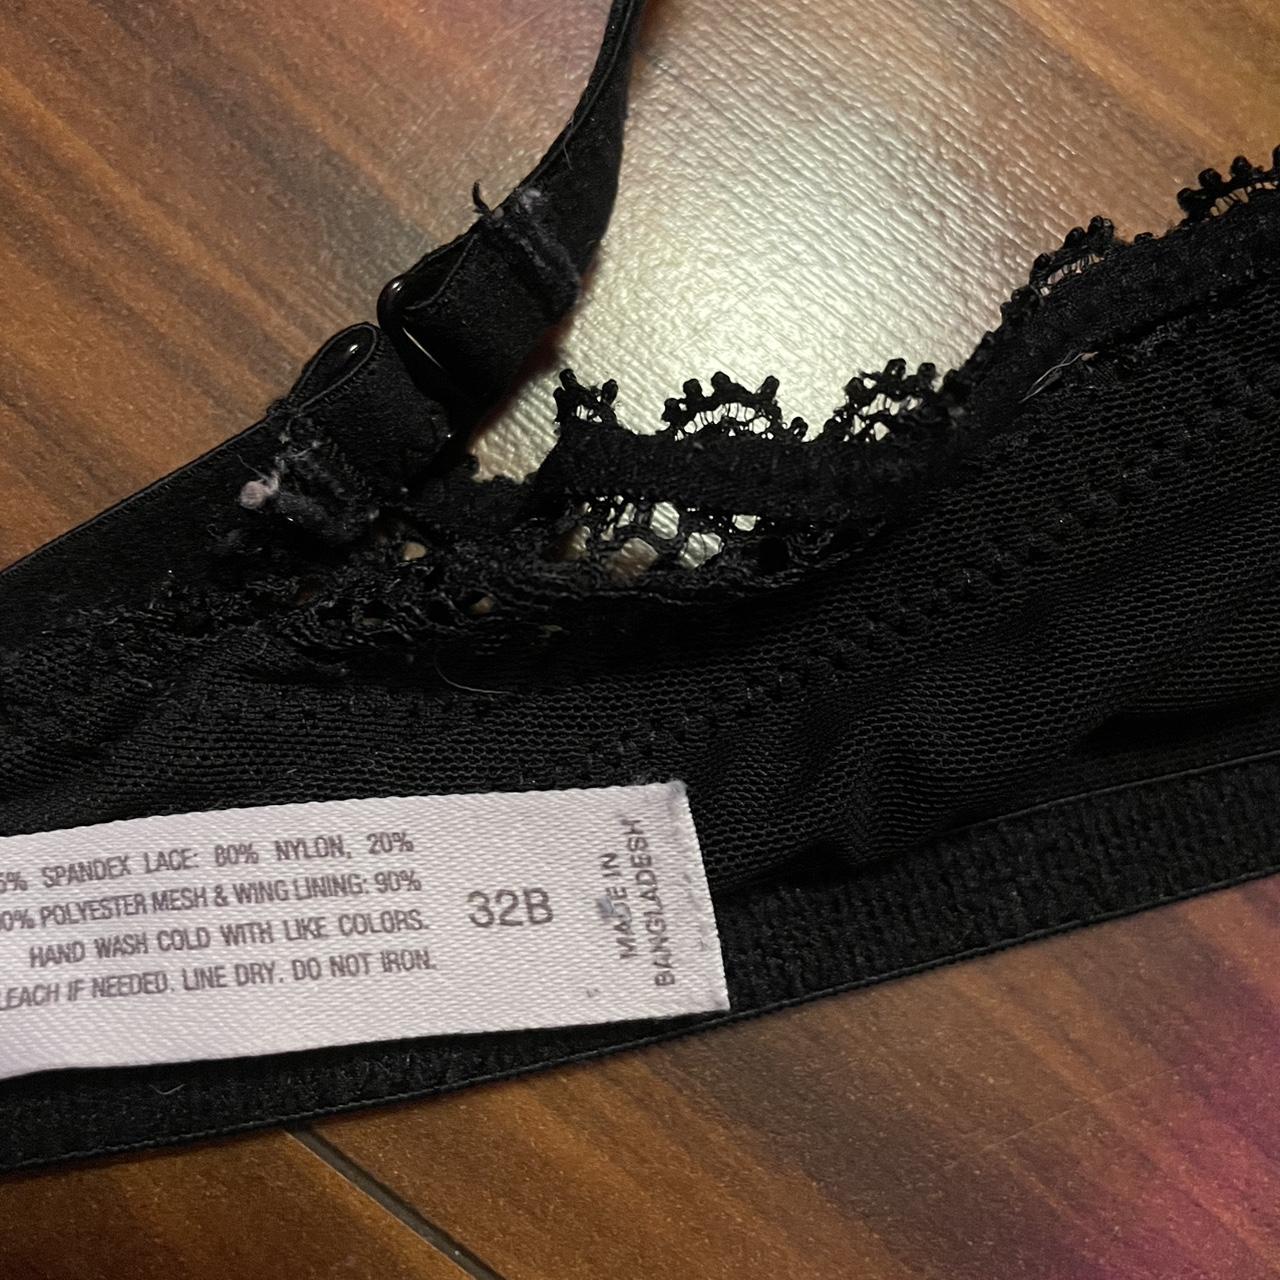 Black push up bra size 32B with some lace on straps - Depop